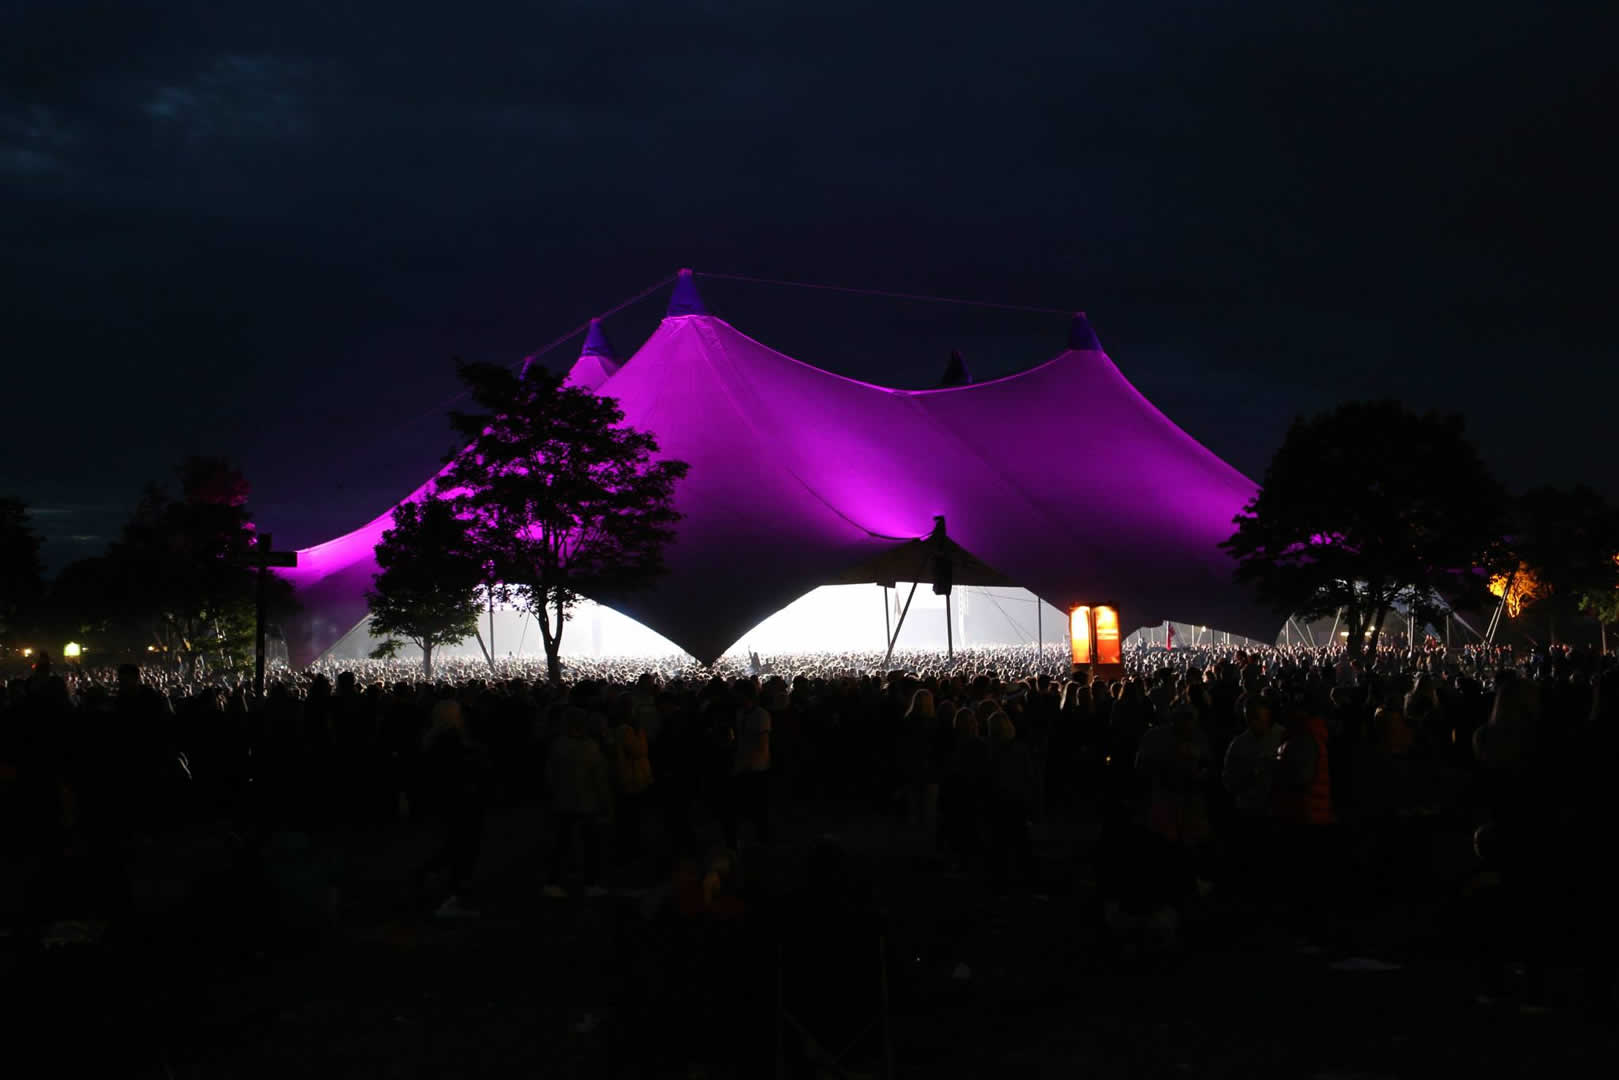 sgm_p5_situation_Roskilde_Festival_Arena_P_5.jpg